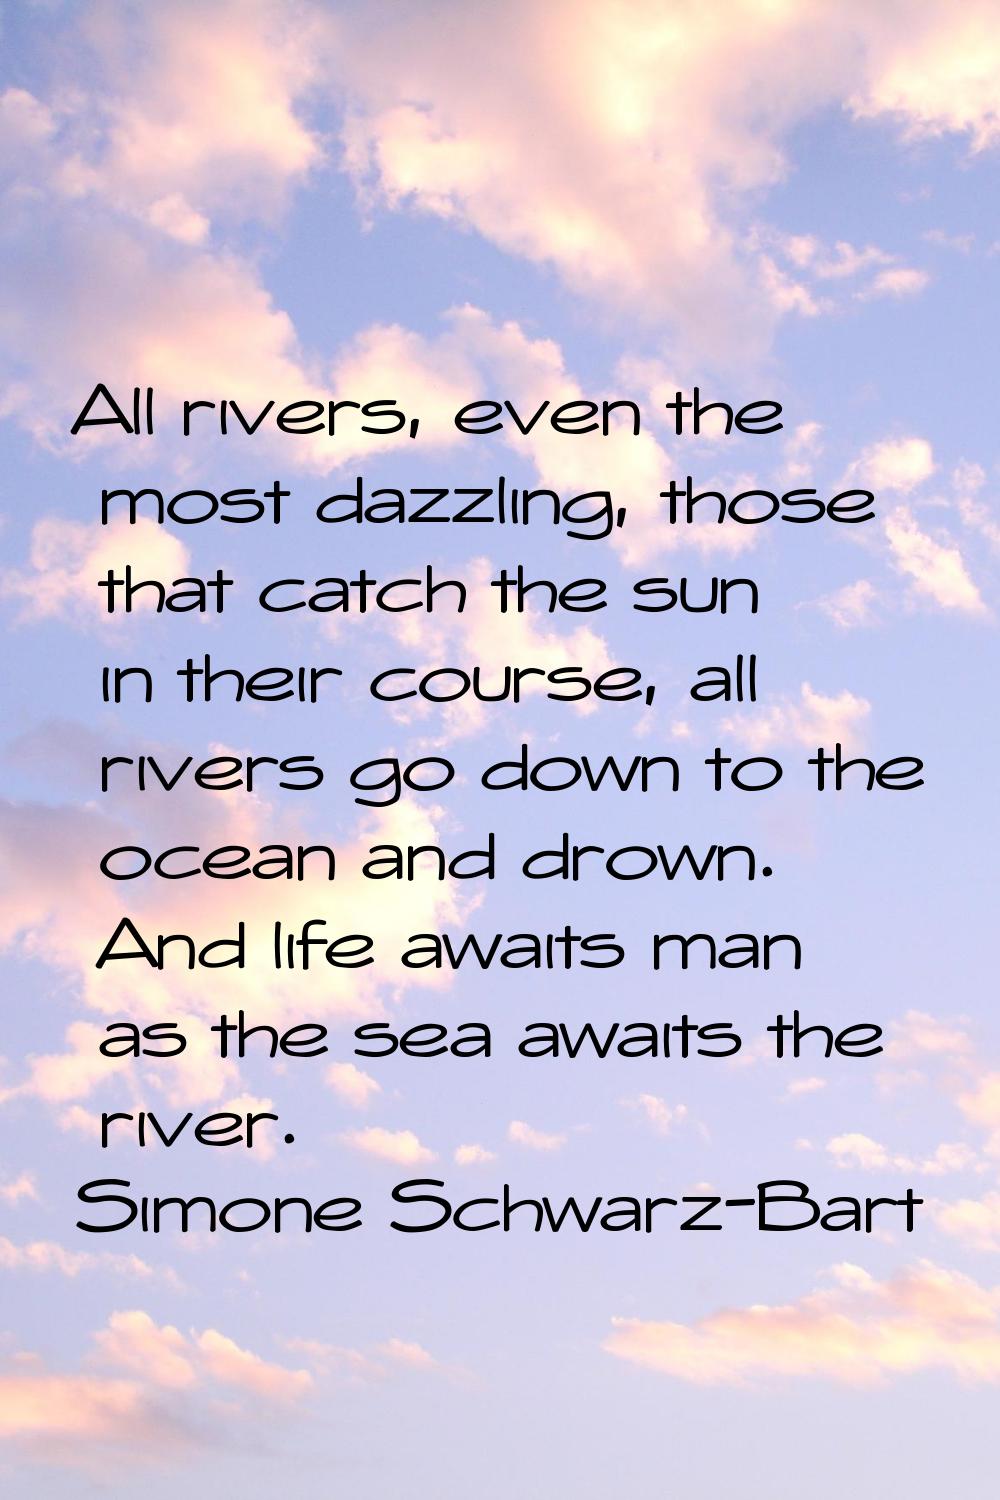 All rivers, even the most dazzling, those that catch the sun in their course, all rivers go down to